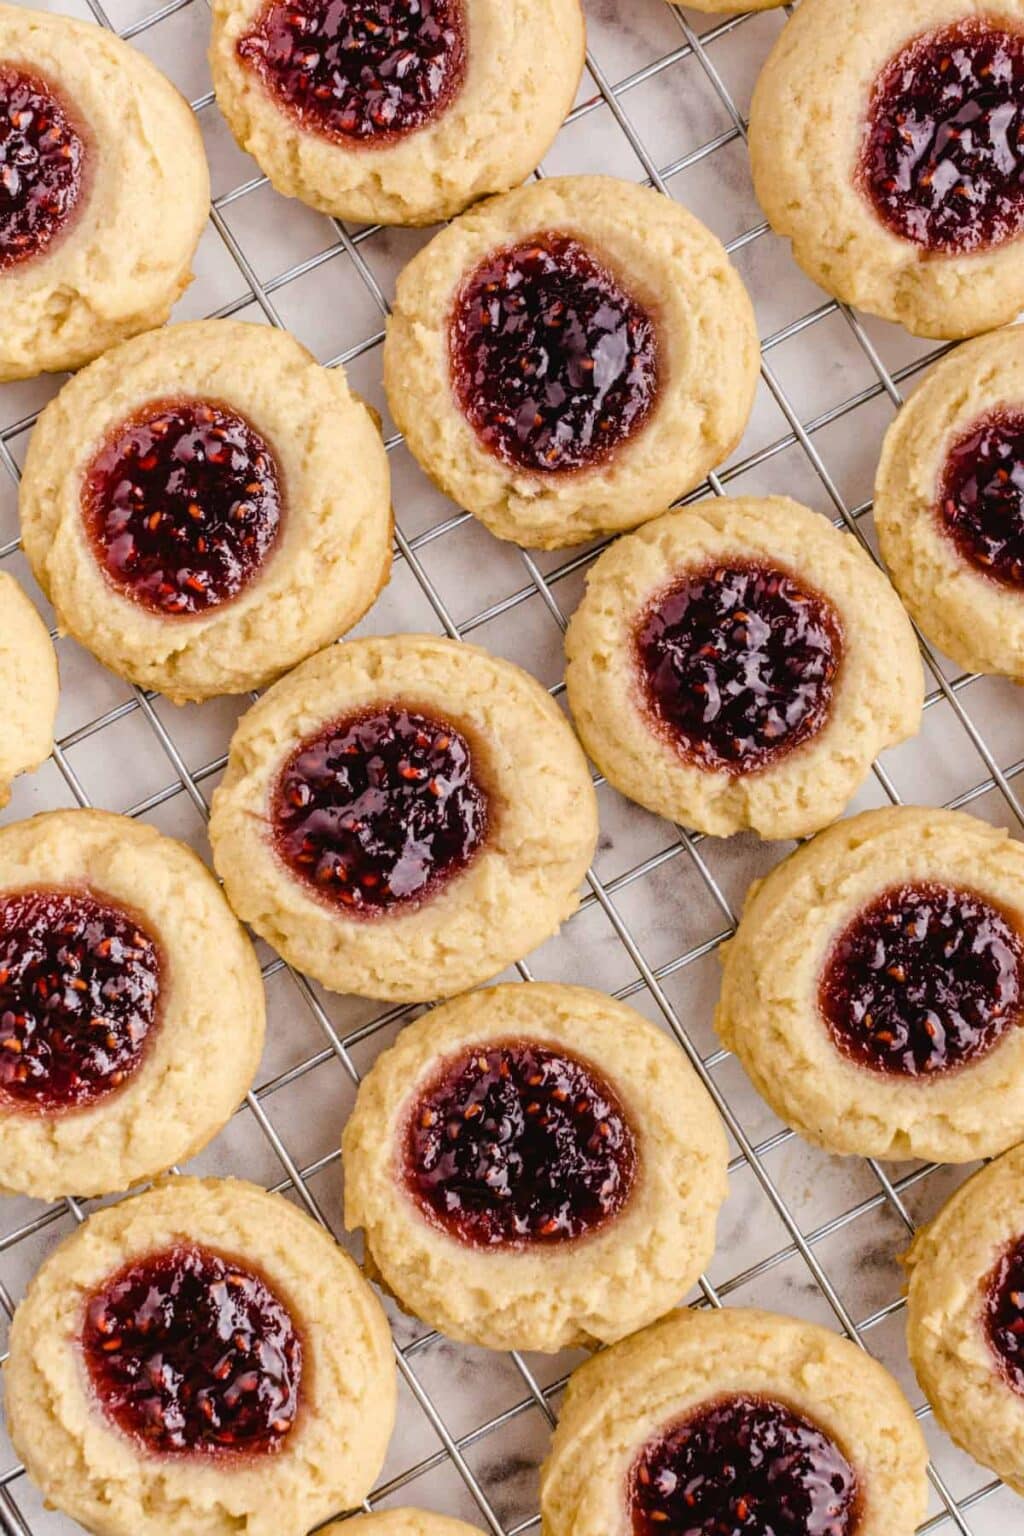 Classic Thumbprint Cookies with Jam (Soft & Chewy!) - Princess Pinky Girl